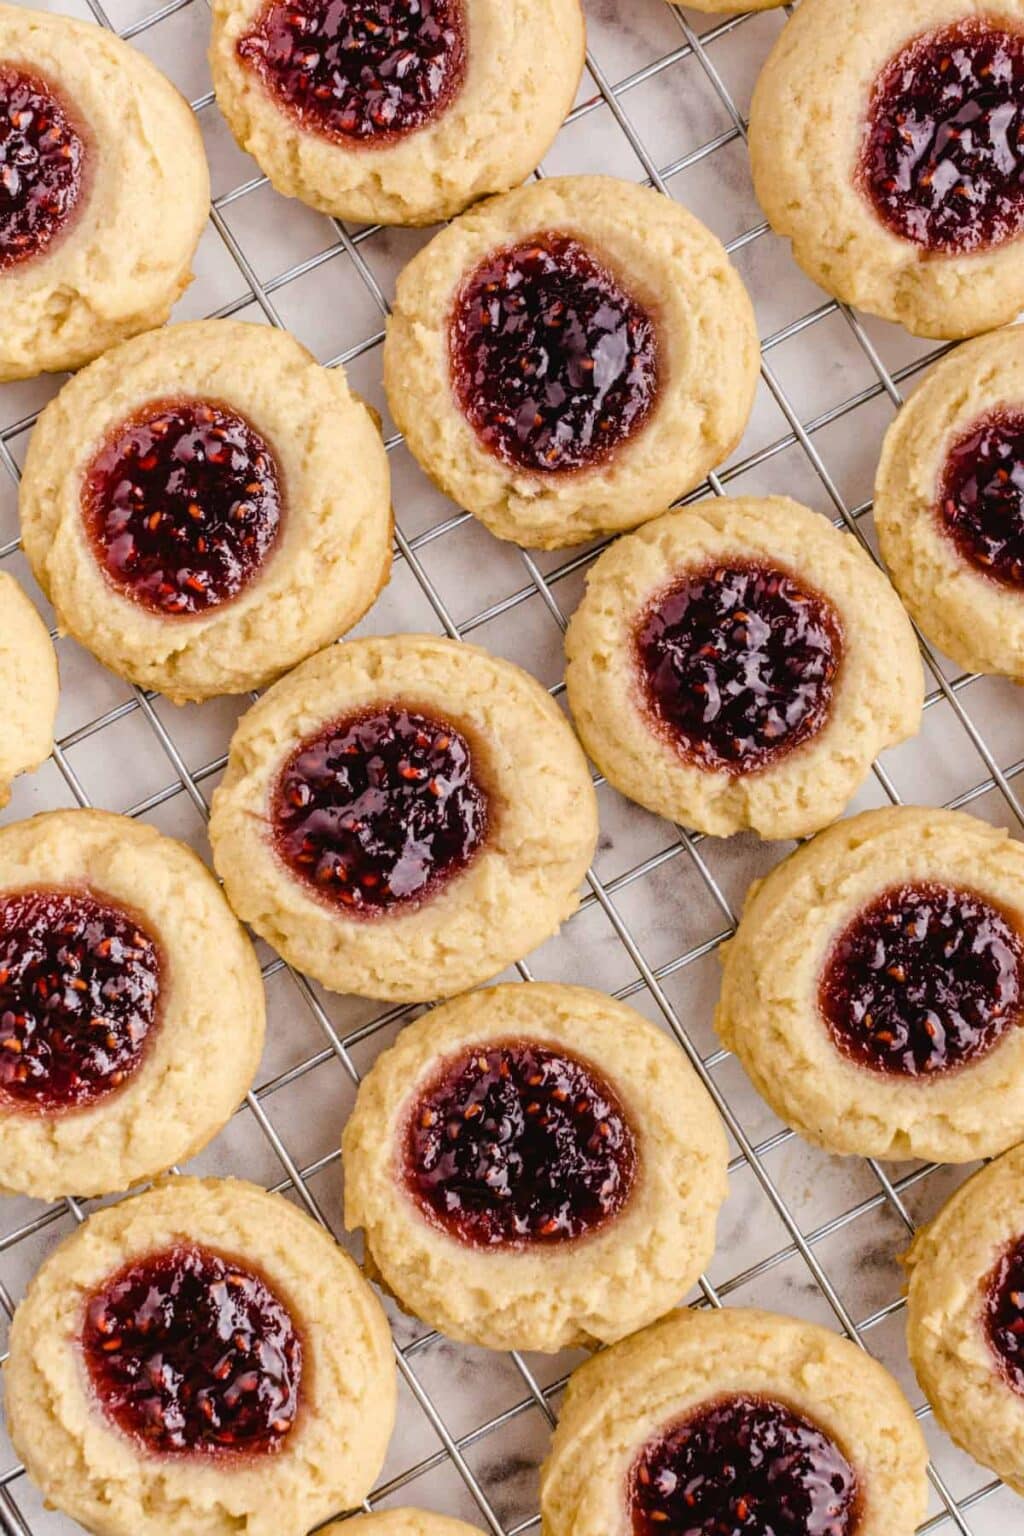 Classic Thumbprint Cookies with Jam (Soft & Chewy!) - Princess Pinky Girl